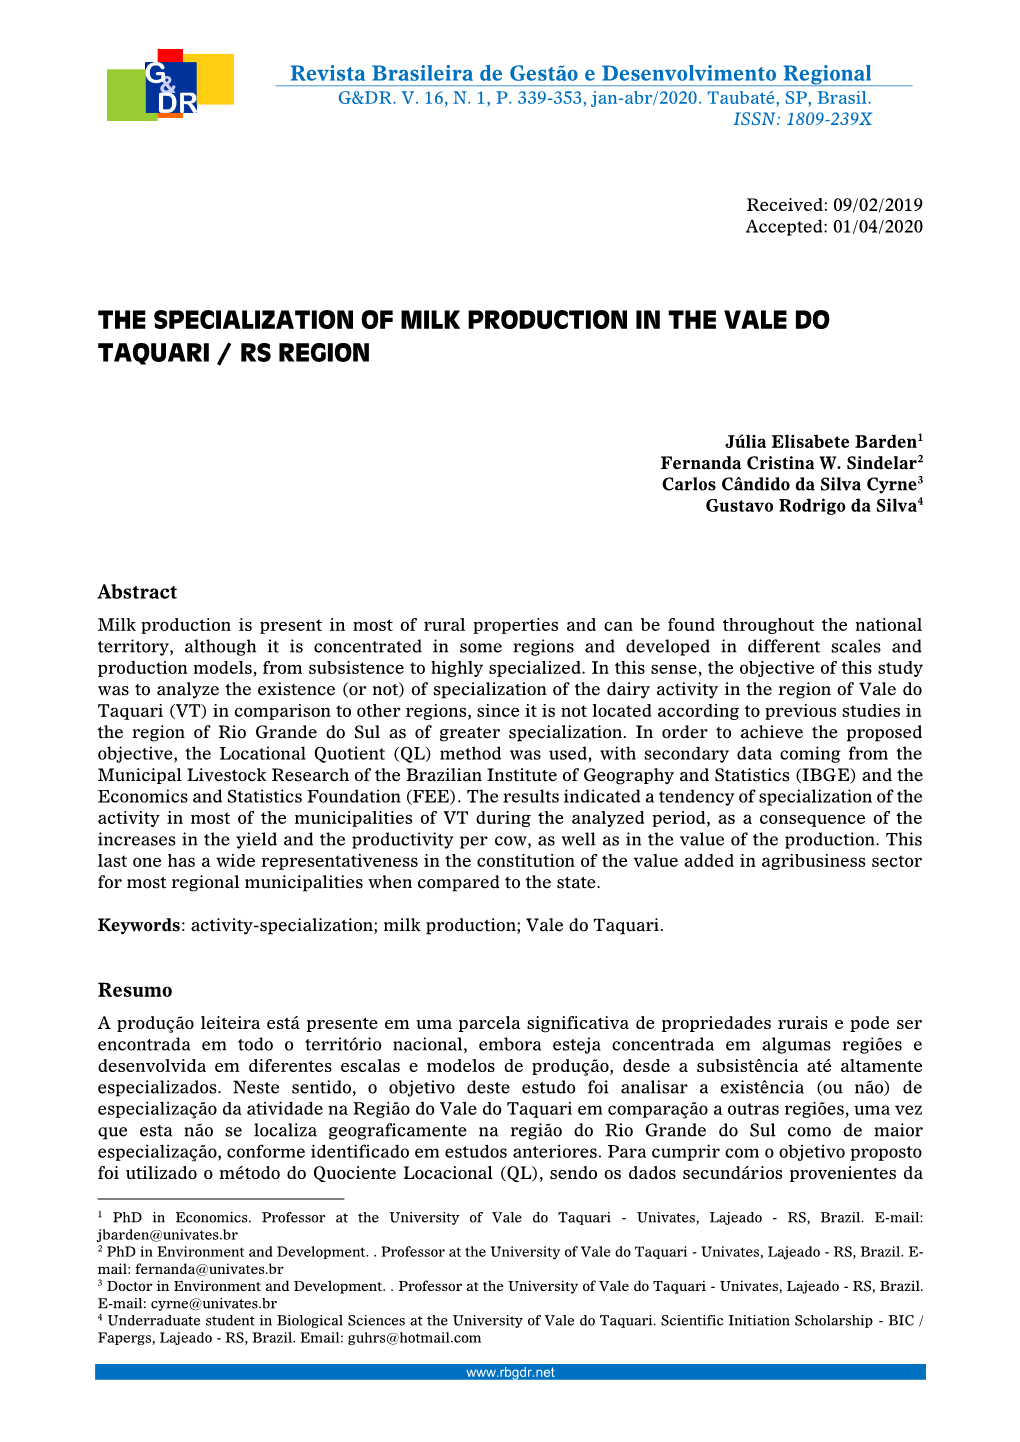 The Specialization of Milk Production in the Vale Do Taquari / Rs Region